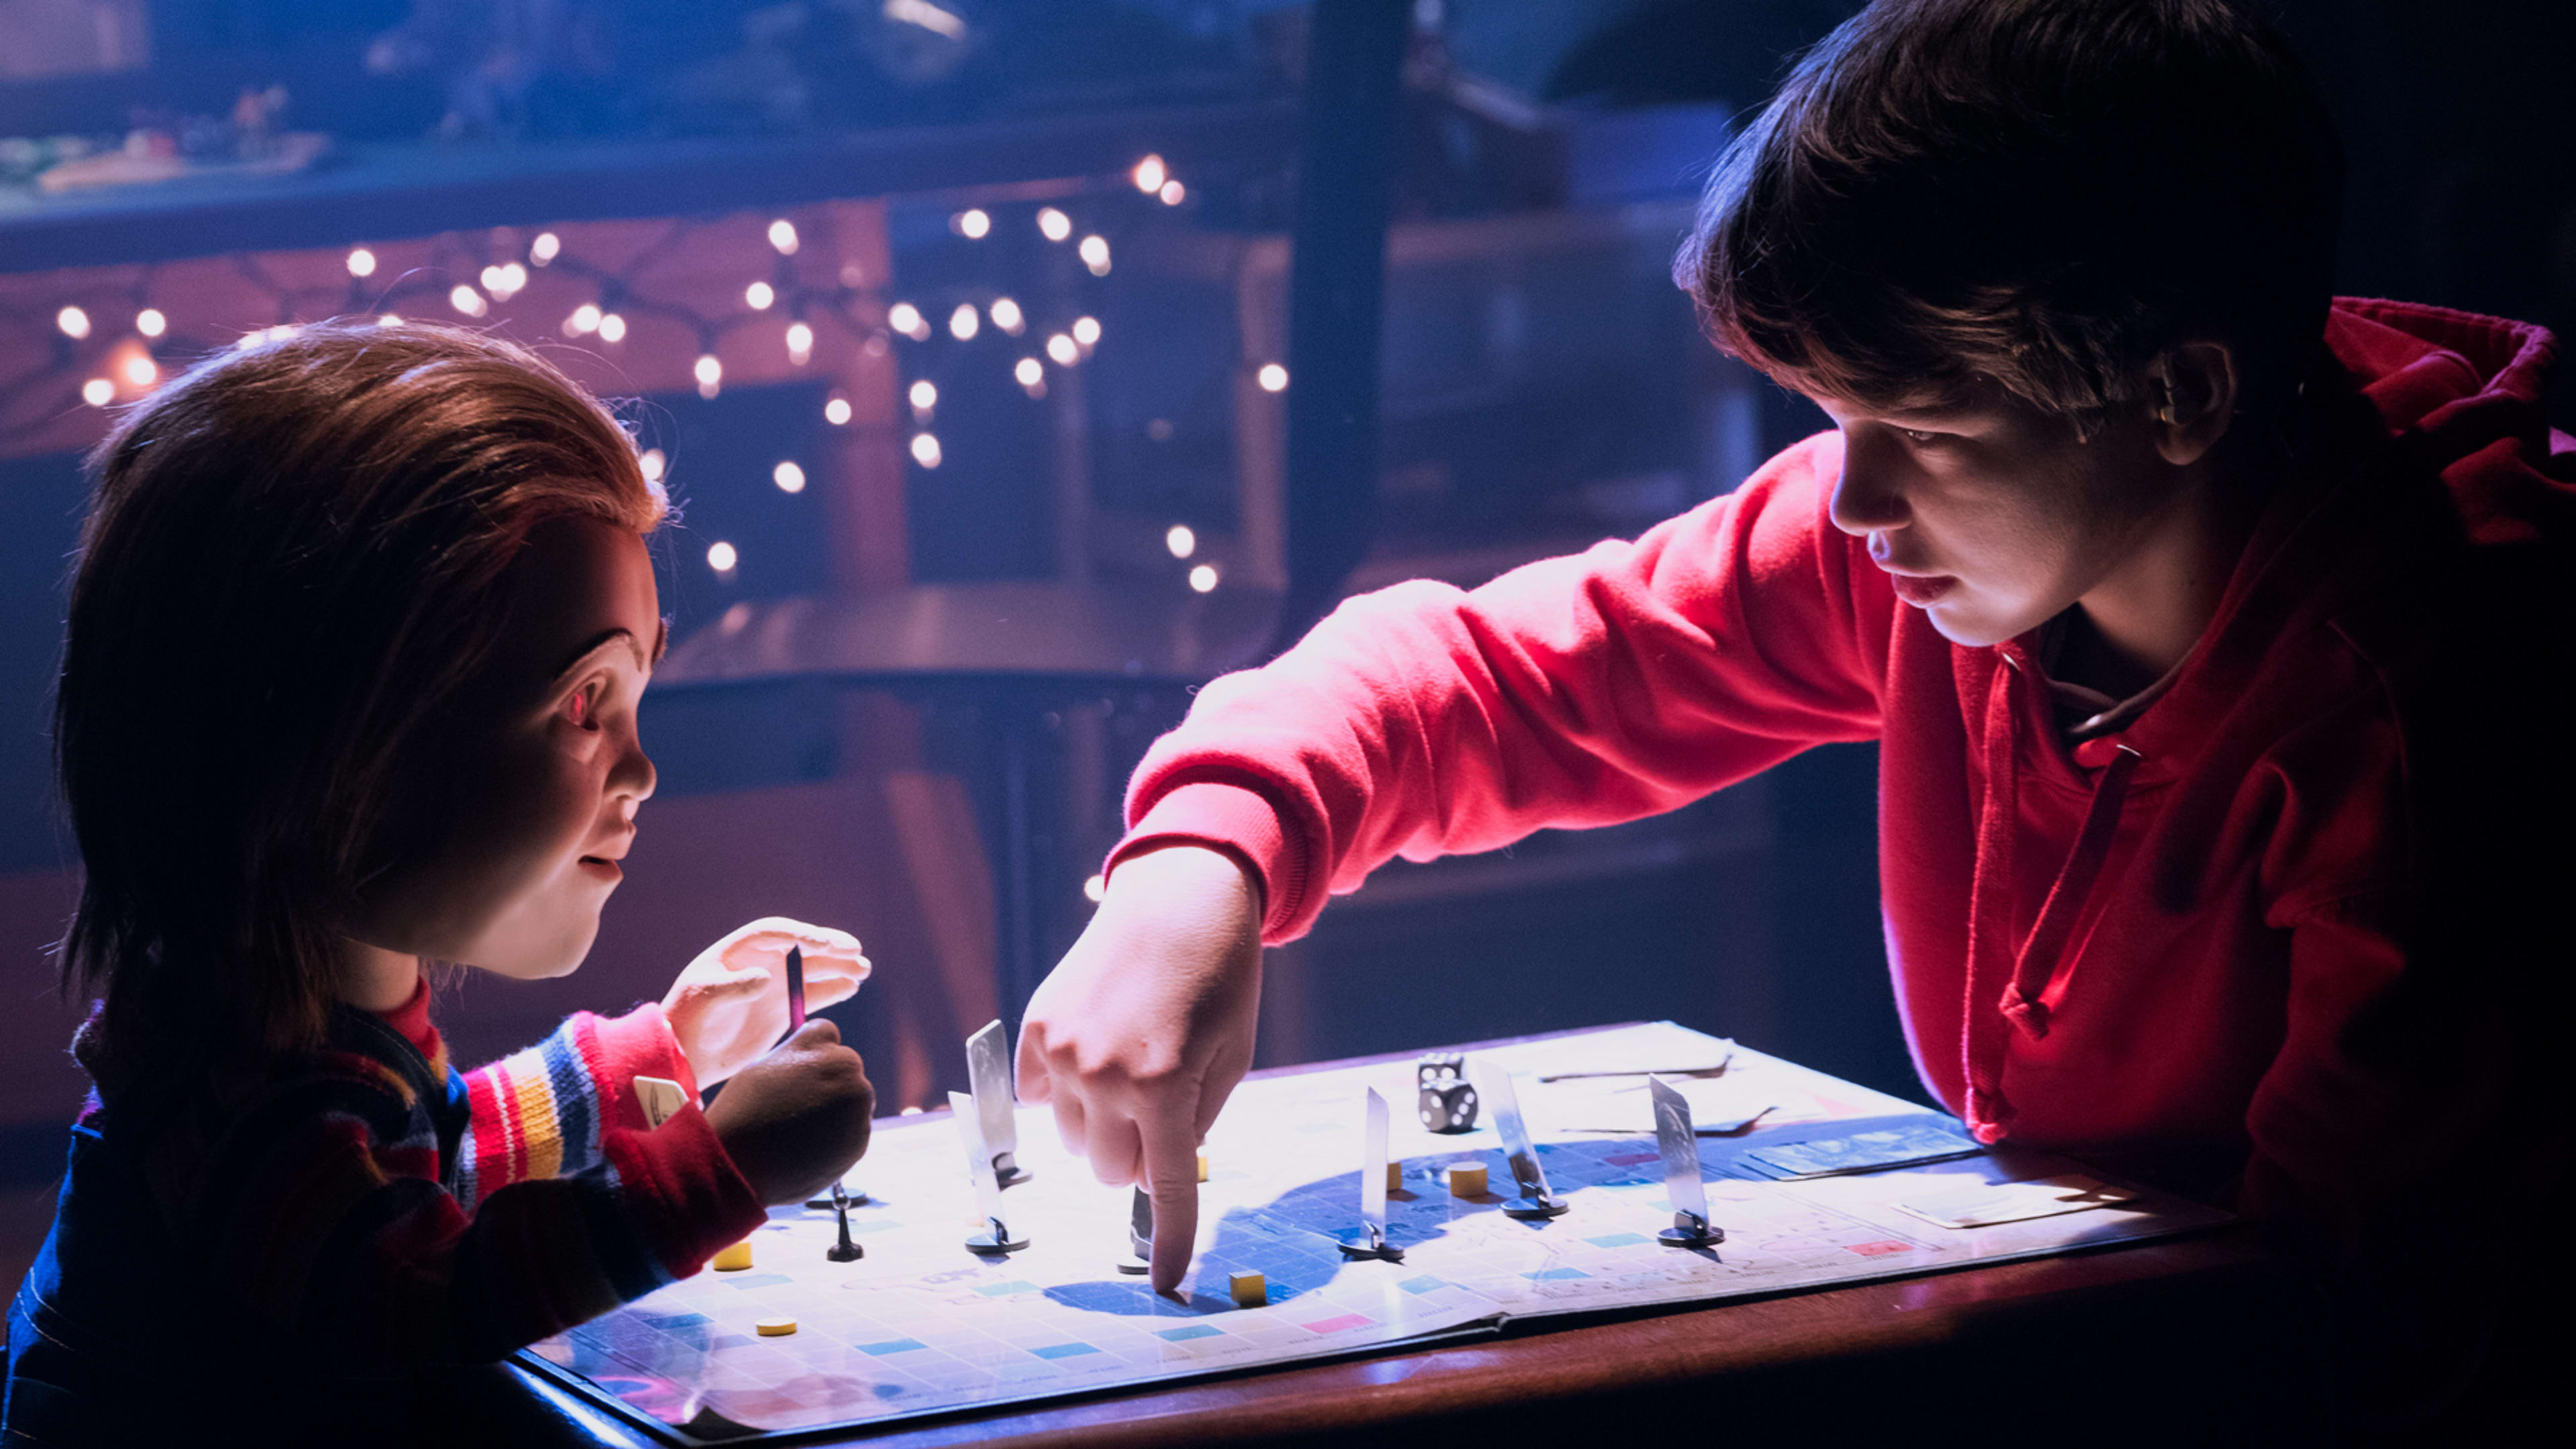 The new ‘Child’s Play’ tries (and fails) to be the ‘Black Mirror’ of slasher flicks